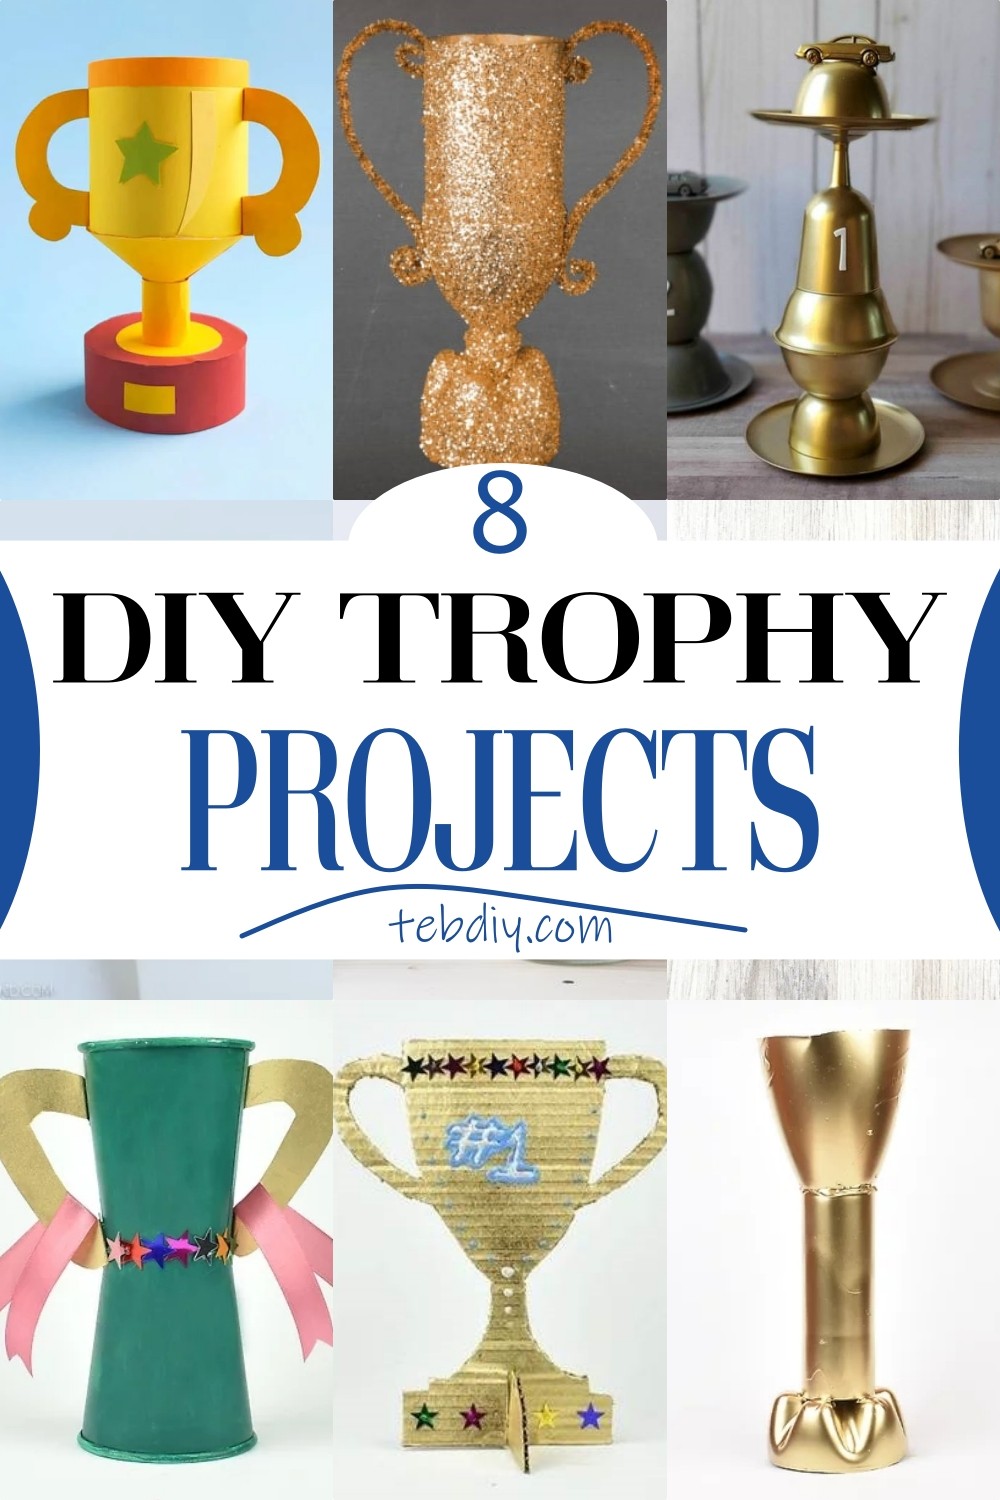 DIY Trophy Projects 